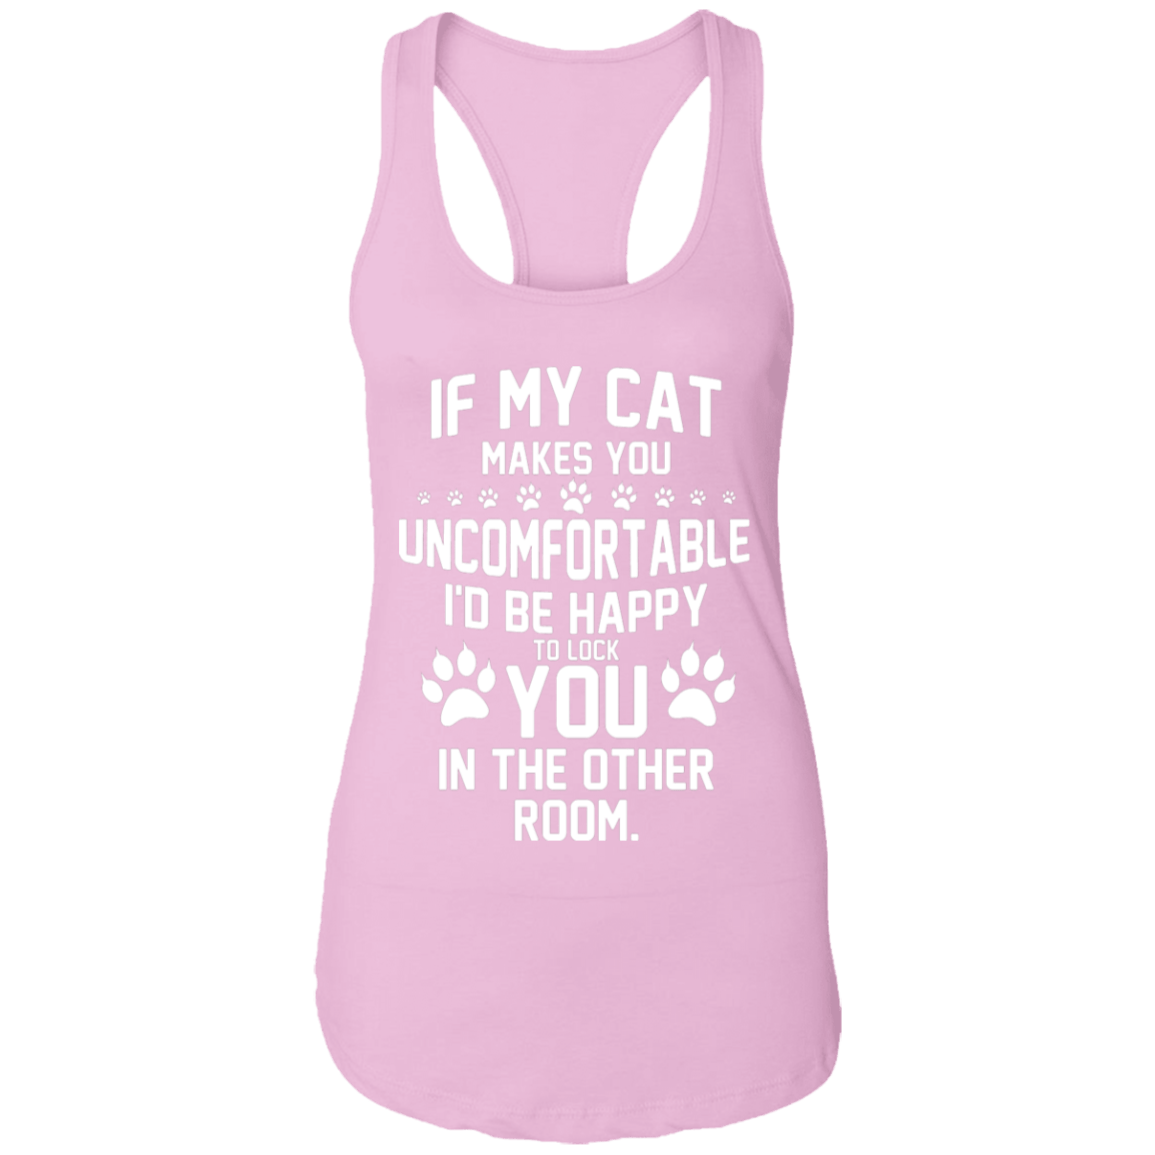 If My Cat Makes You Uncomfortable - Ladies Racer Back Tank.